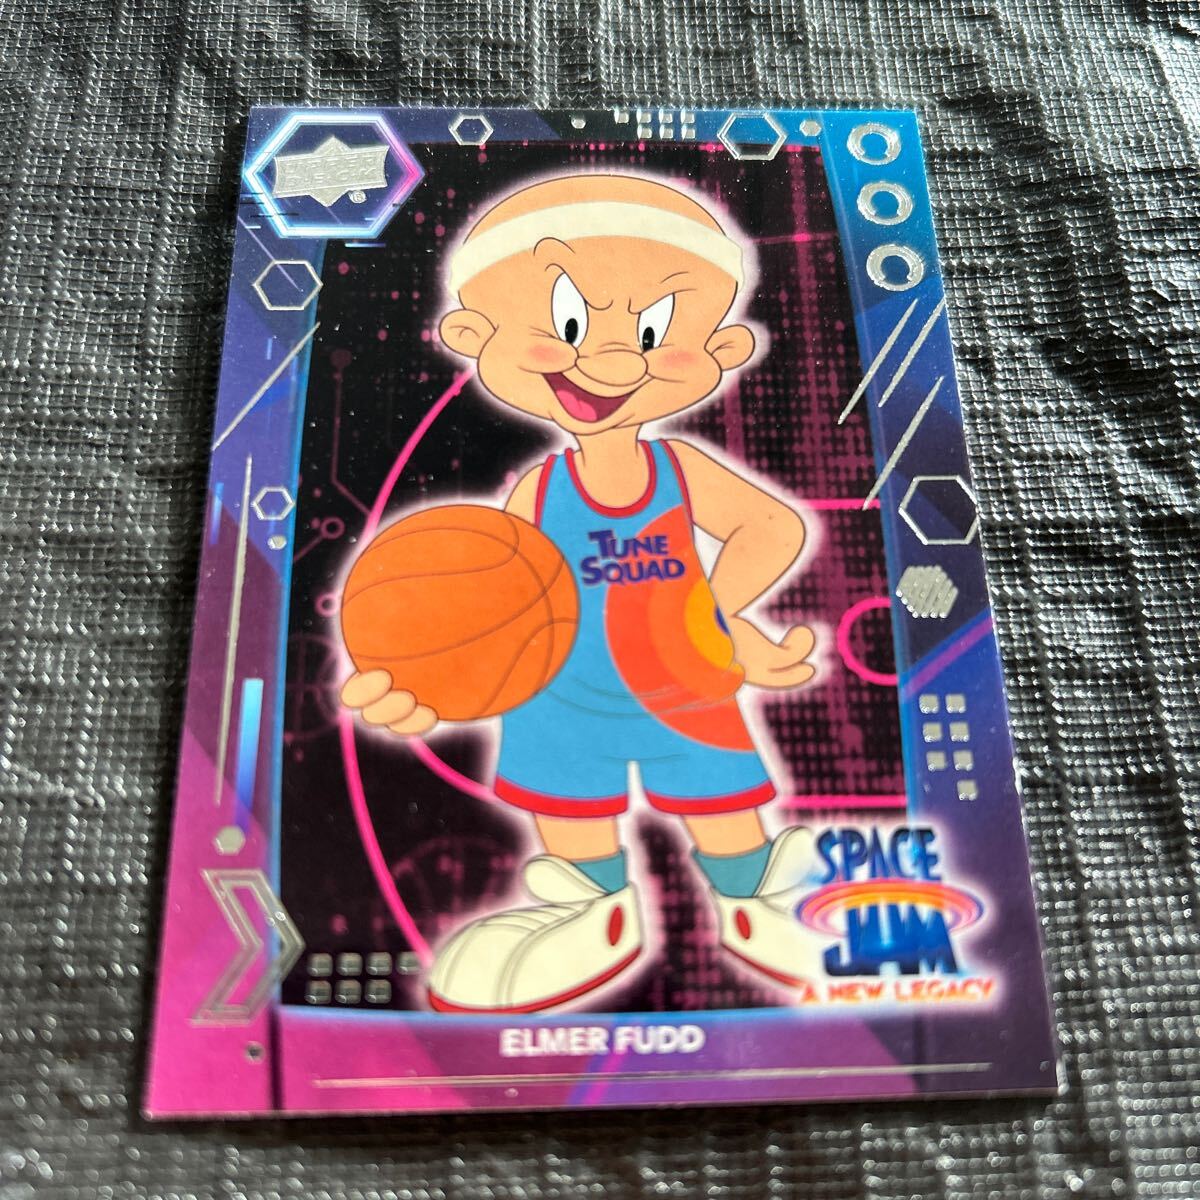 2021 UpperDeck Space Jam A New Legacy Lebron James 他10カード　レブロンジェームス　レイカーズ_画像7